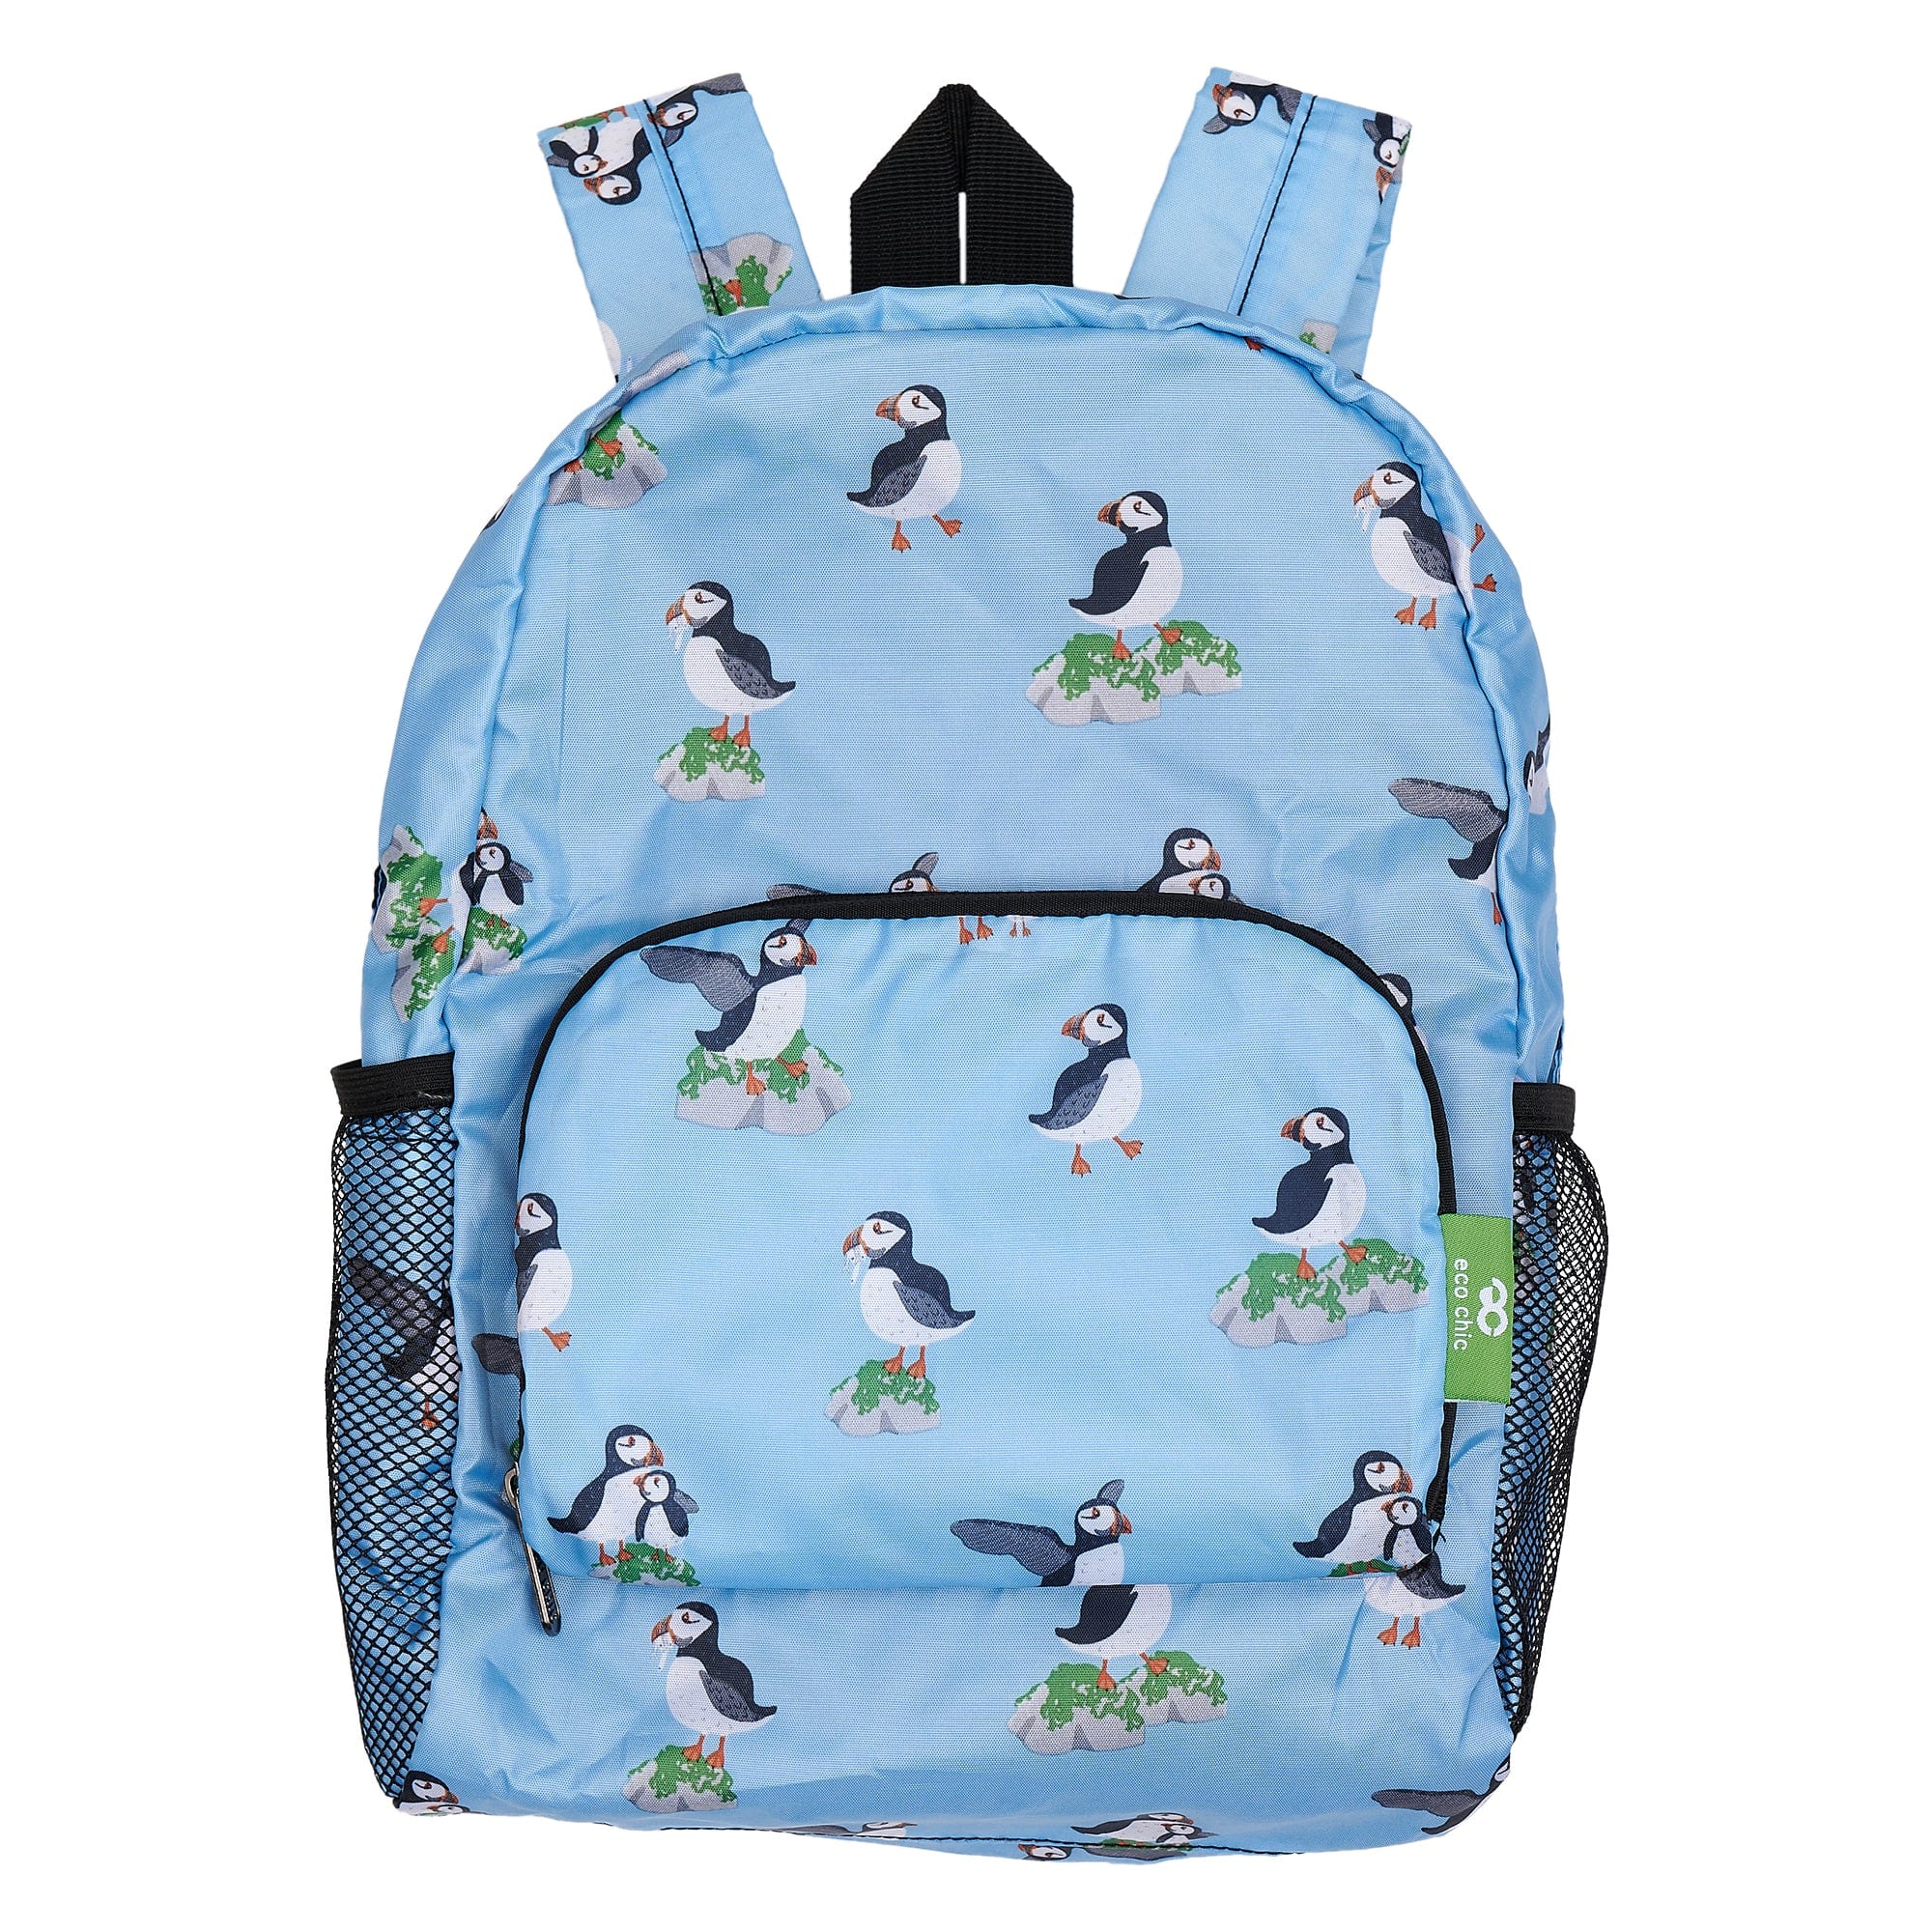 Eco Chic Blue Eco Chic Lightweight Foldable Mini Backpack Multi Puffin